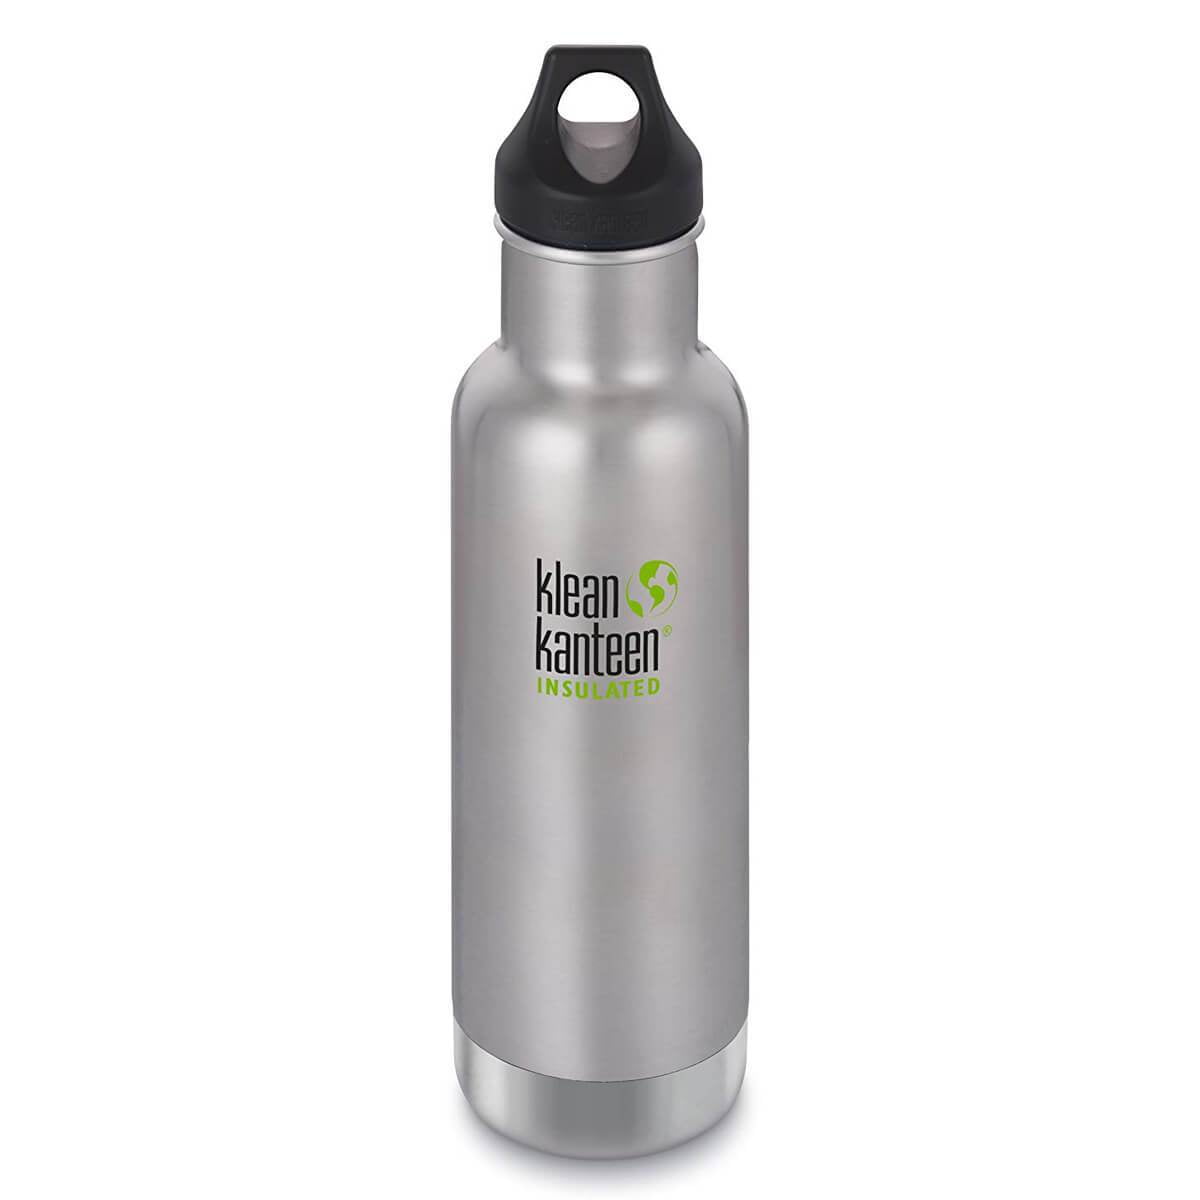 Klean Kanteen Bottle - Classic Insulated Stainless Steel with Loop Cap